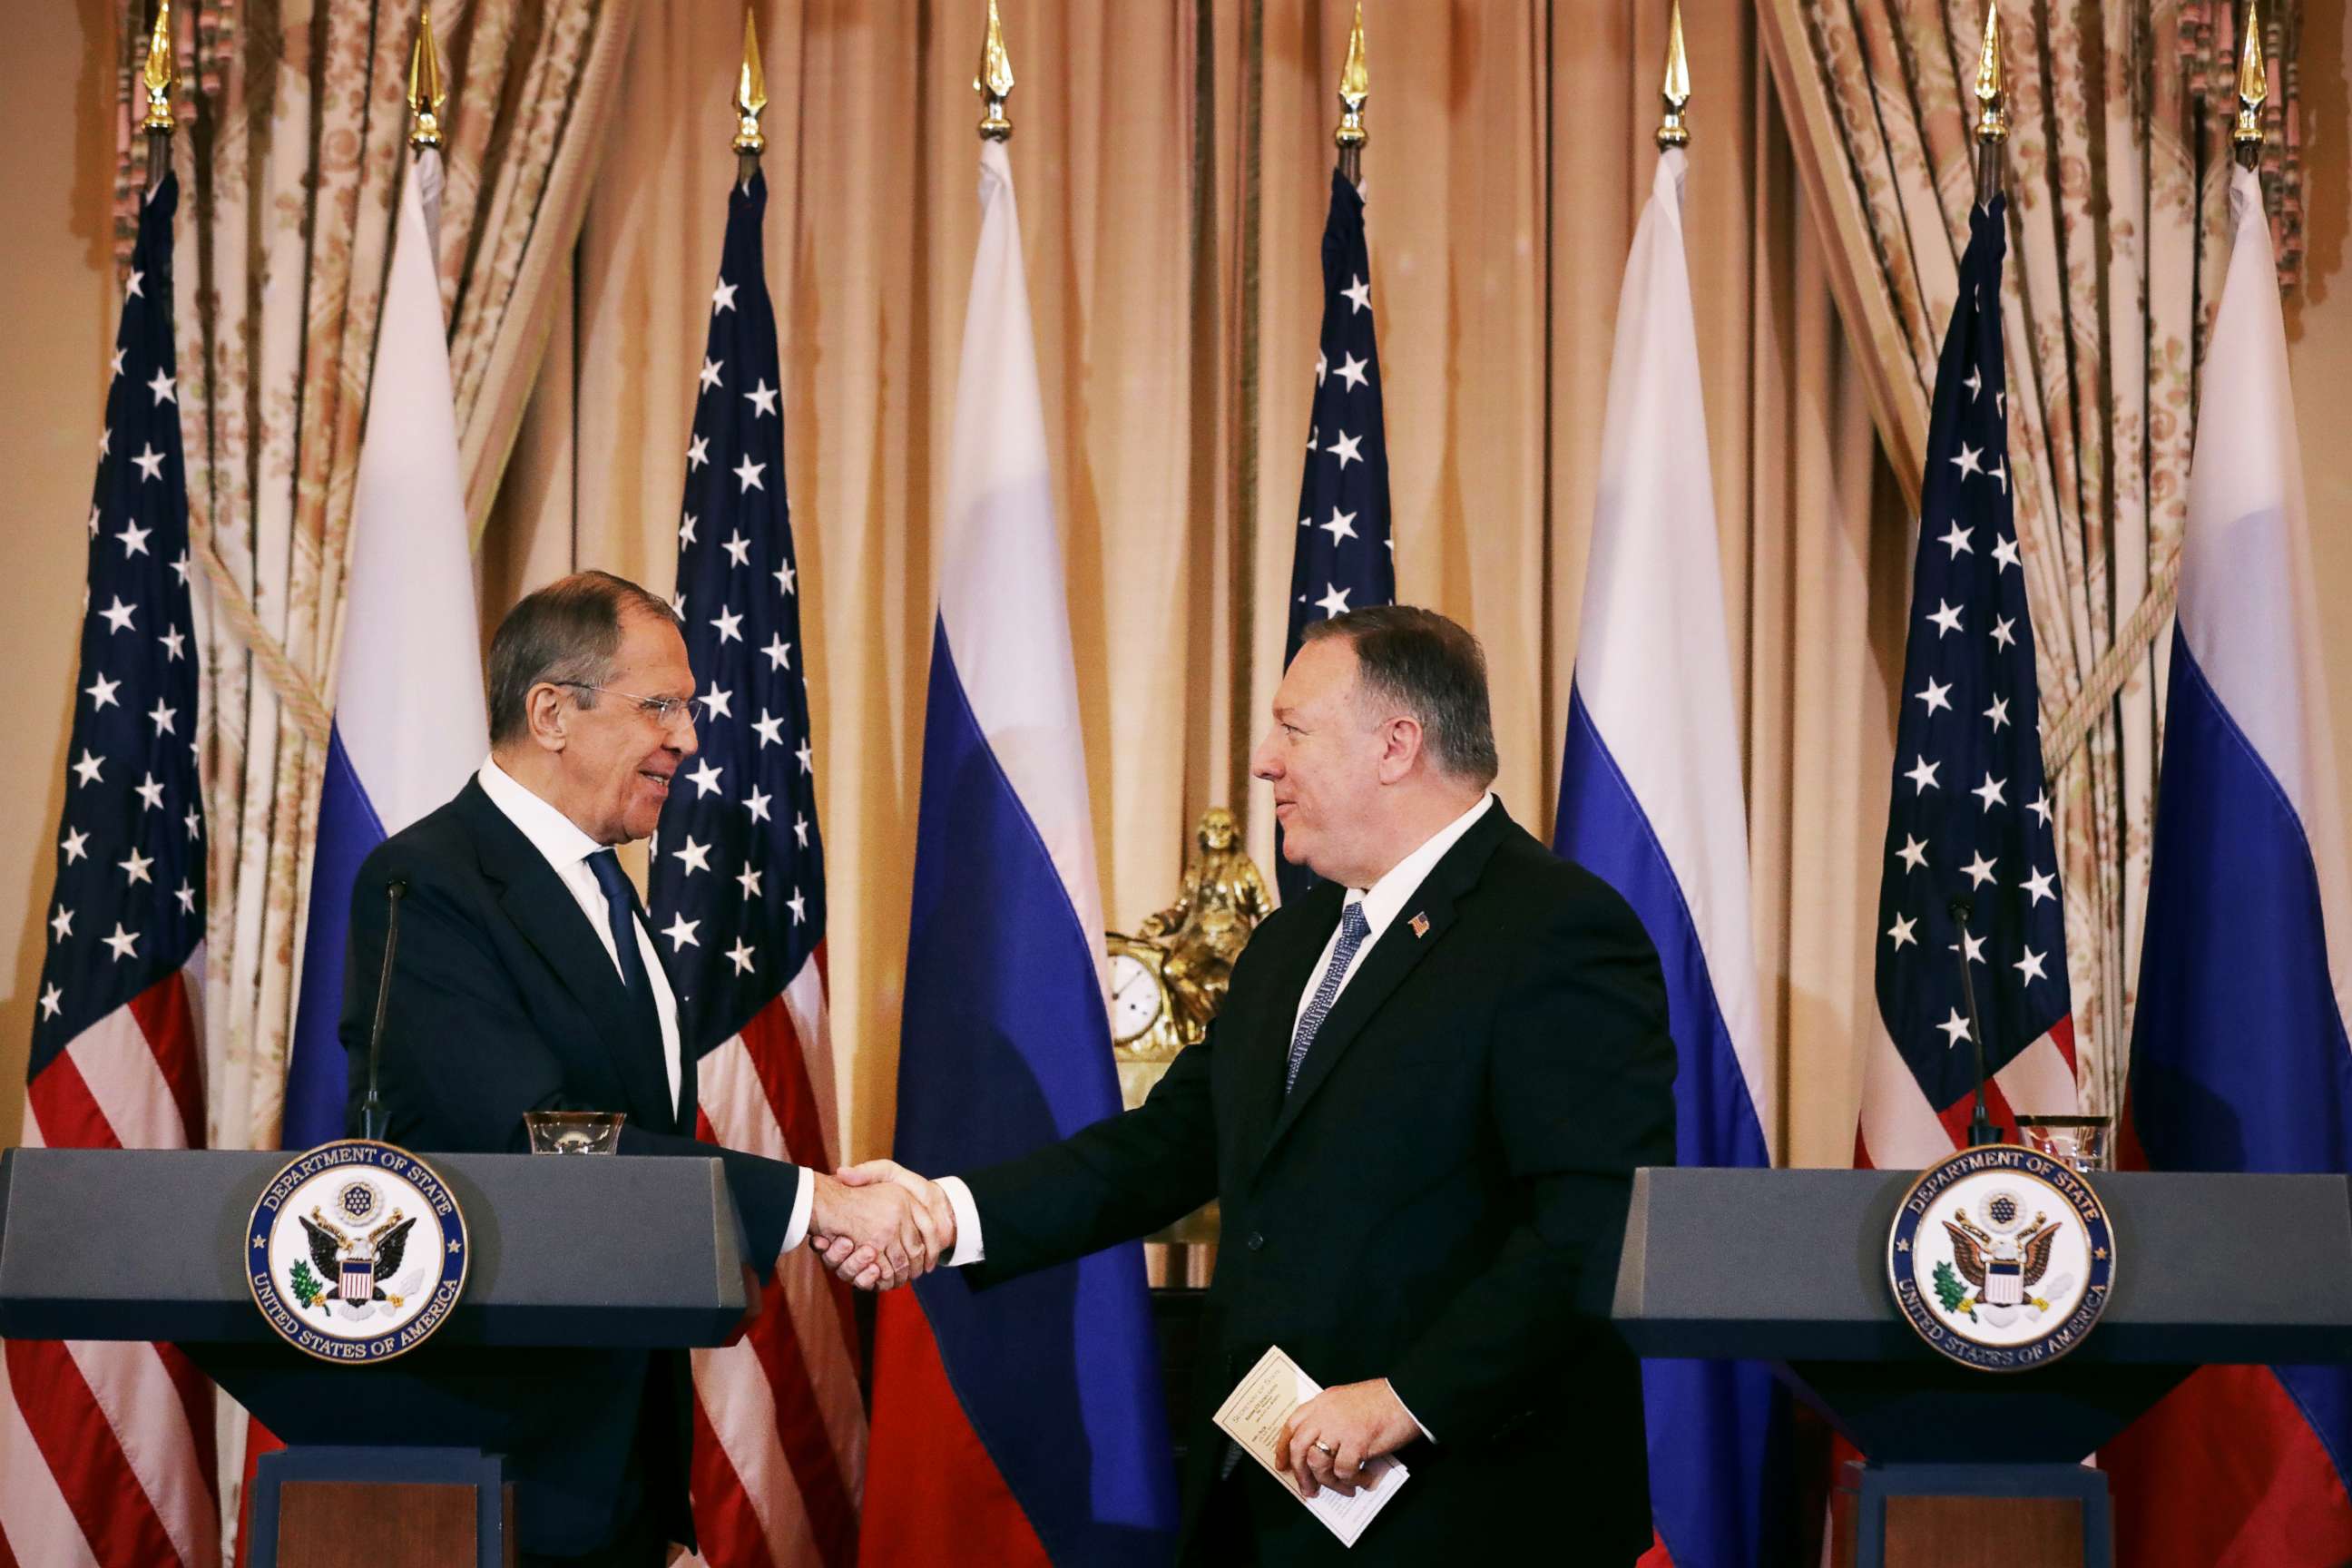 PHOTO: Russian Foreign Minister Sergey Lavrov, and U.S. Secretary of State Mike Pompeo shake hands at the conclusion of a joint news conference in the Franklin Room at the State Department Dec. 10, 2019 in Washington, D.C.